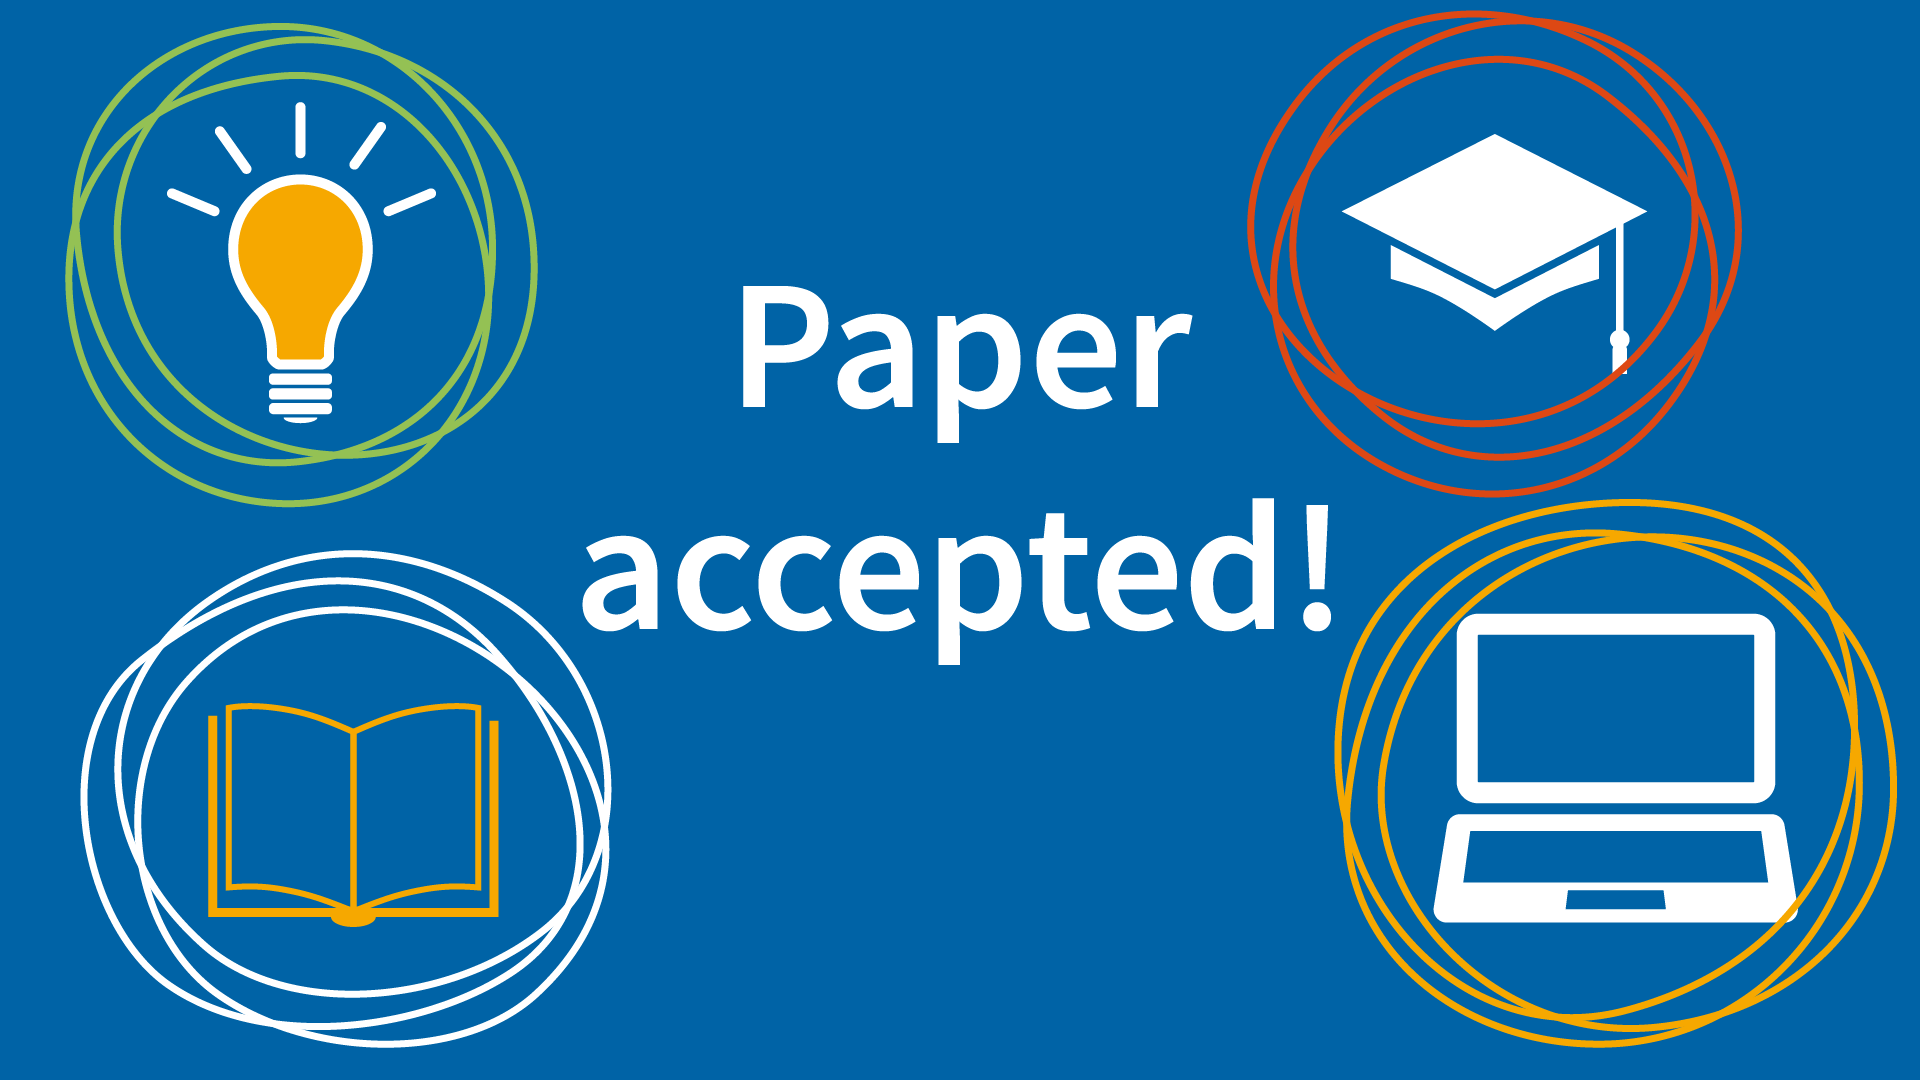 text "Paper accepted!" surrounded by illustrations of a lightbulb, an open book, a graduation cap and an open laptop